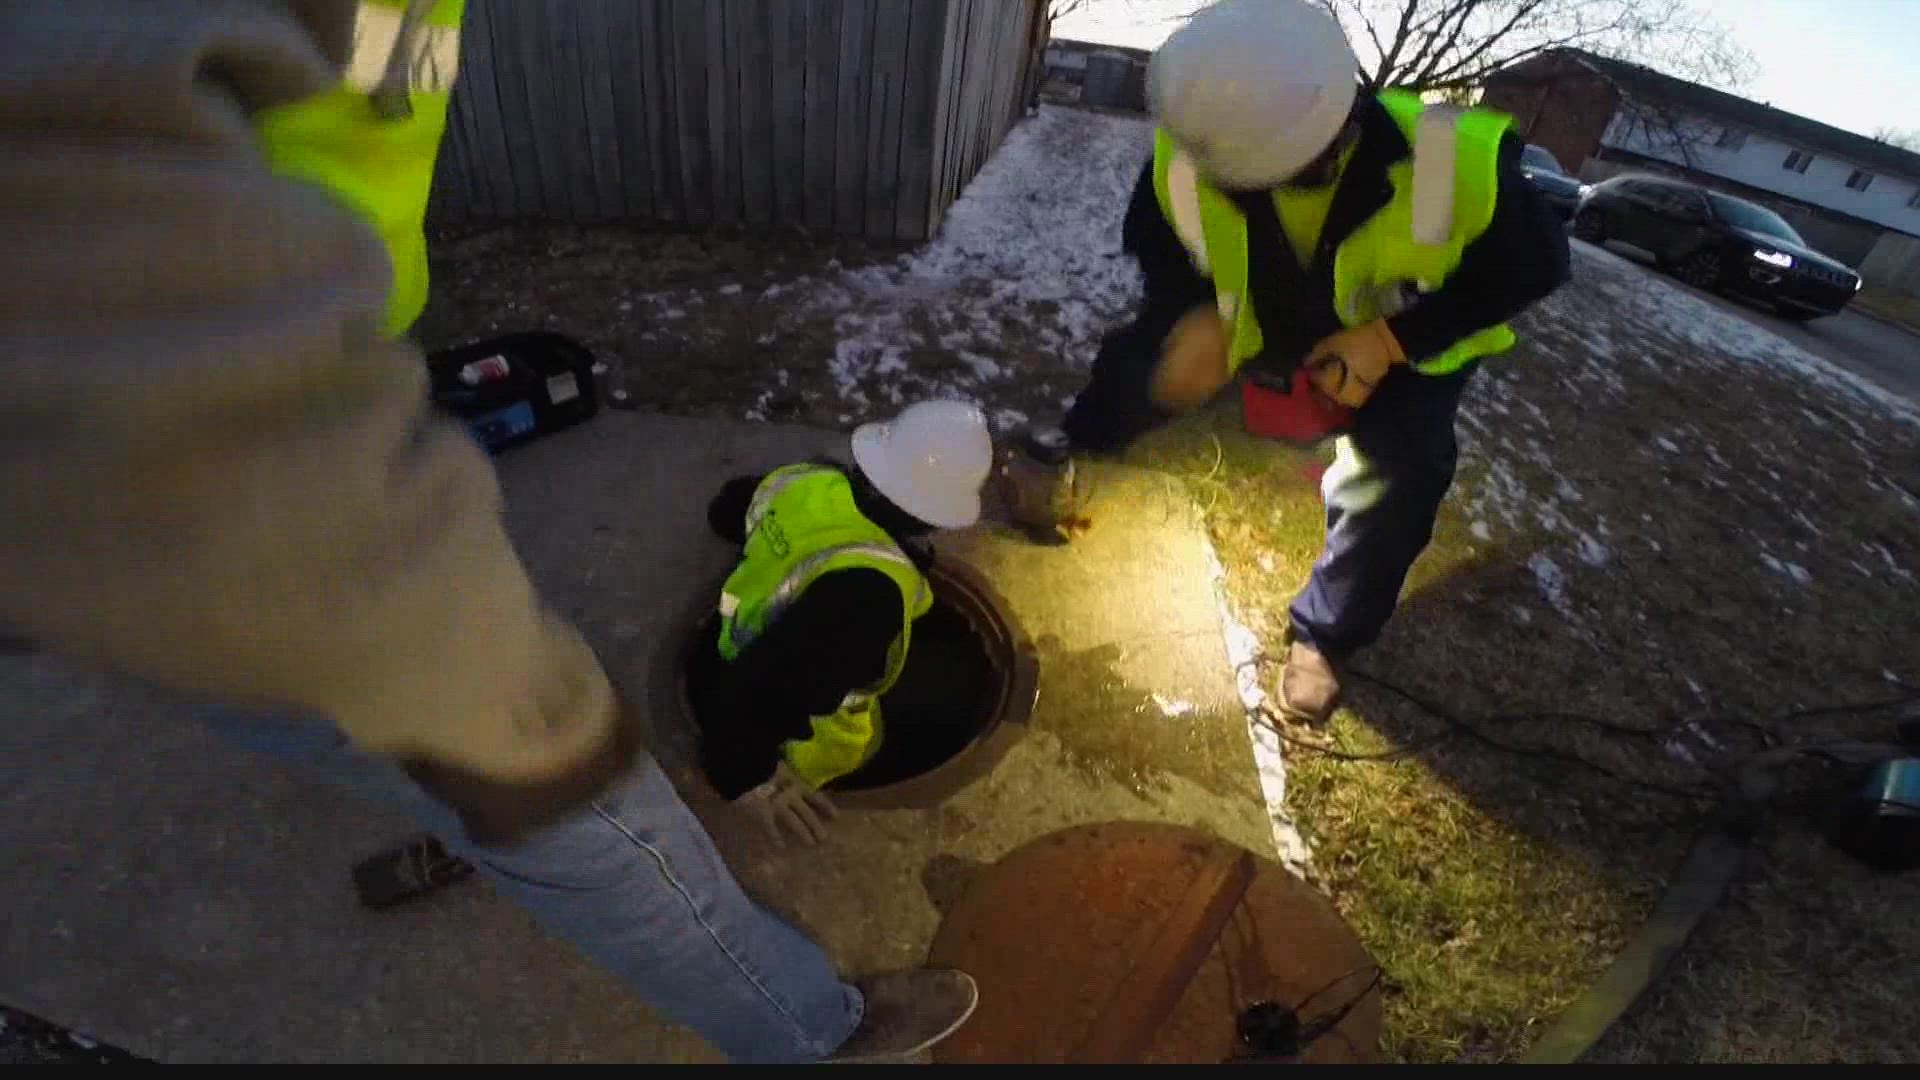 Running water has returned to two apartment complexes after a disruption of more than 24 hours.